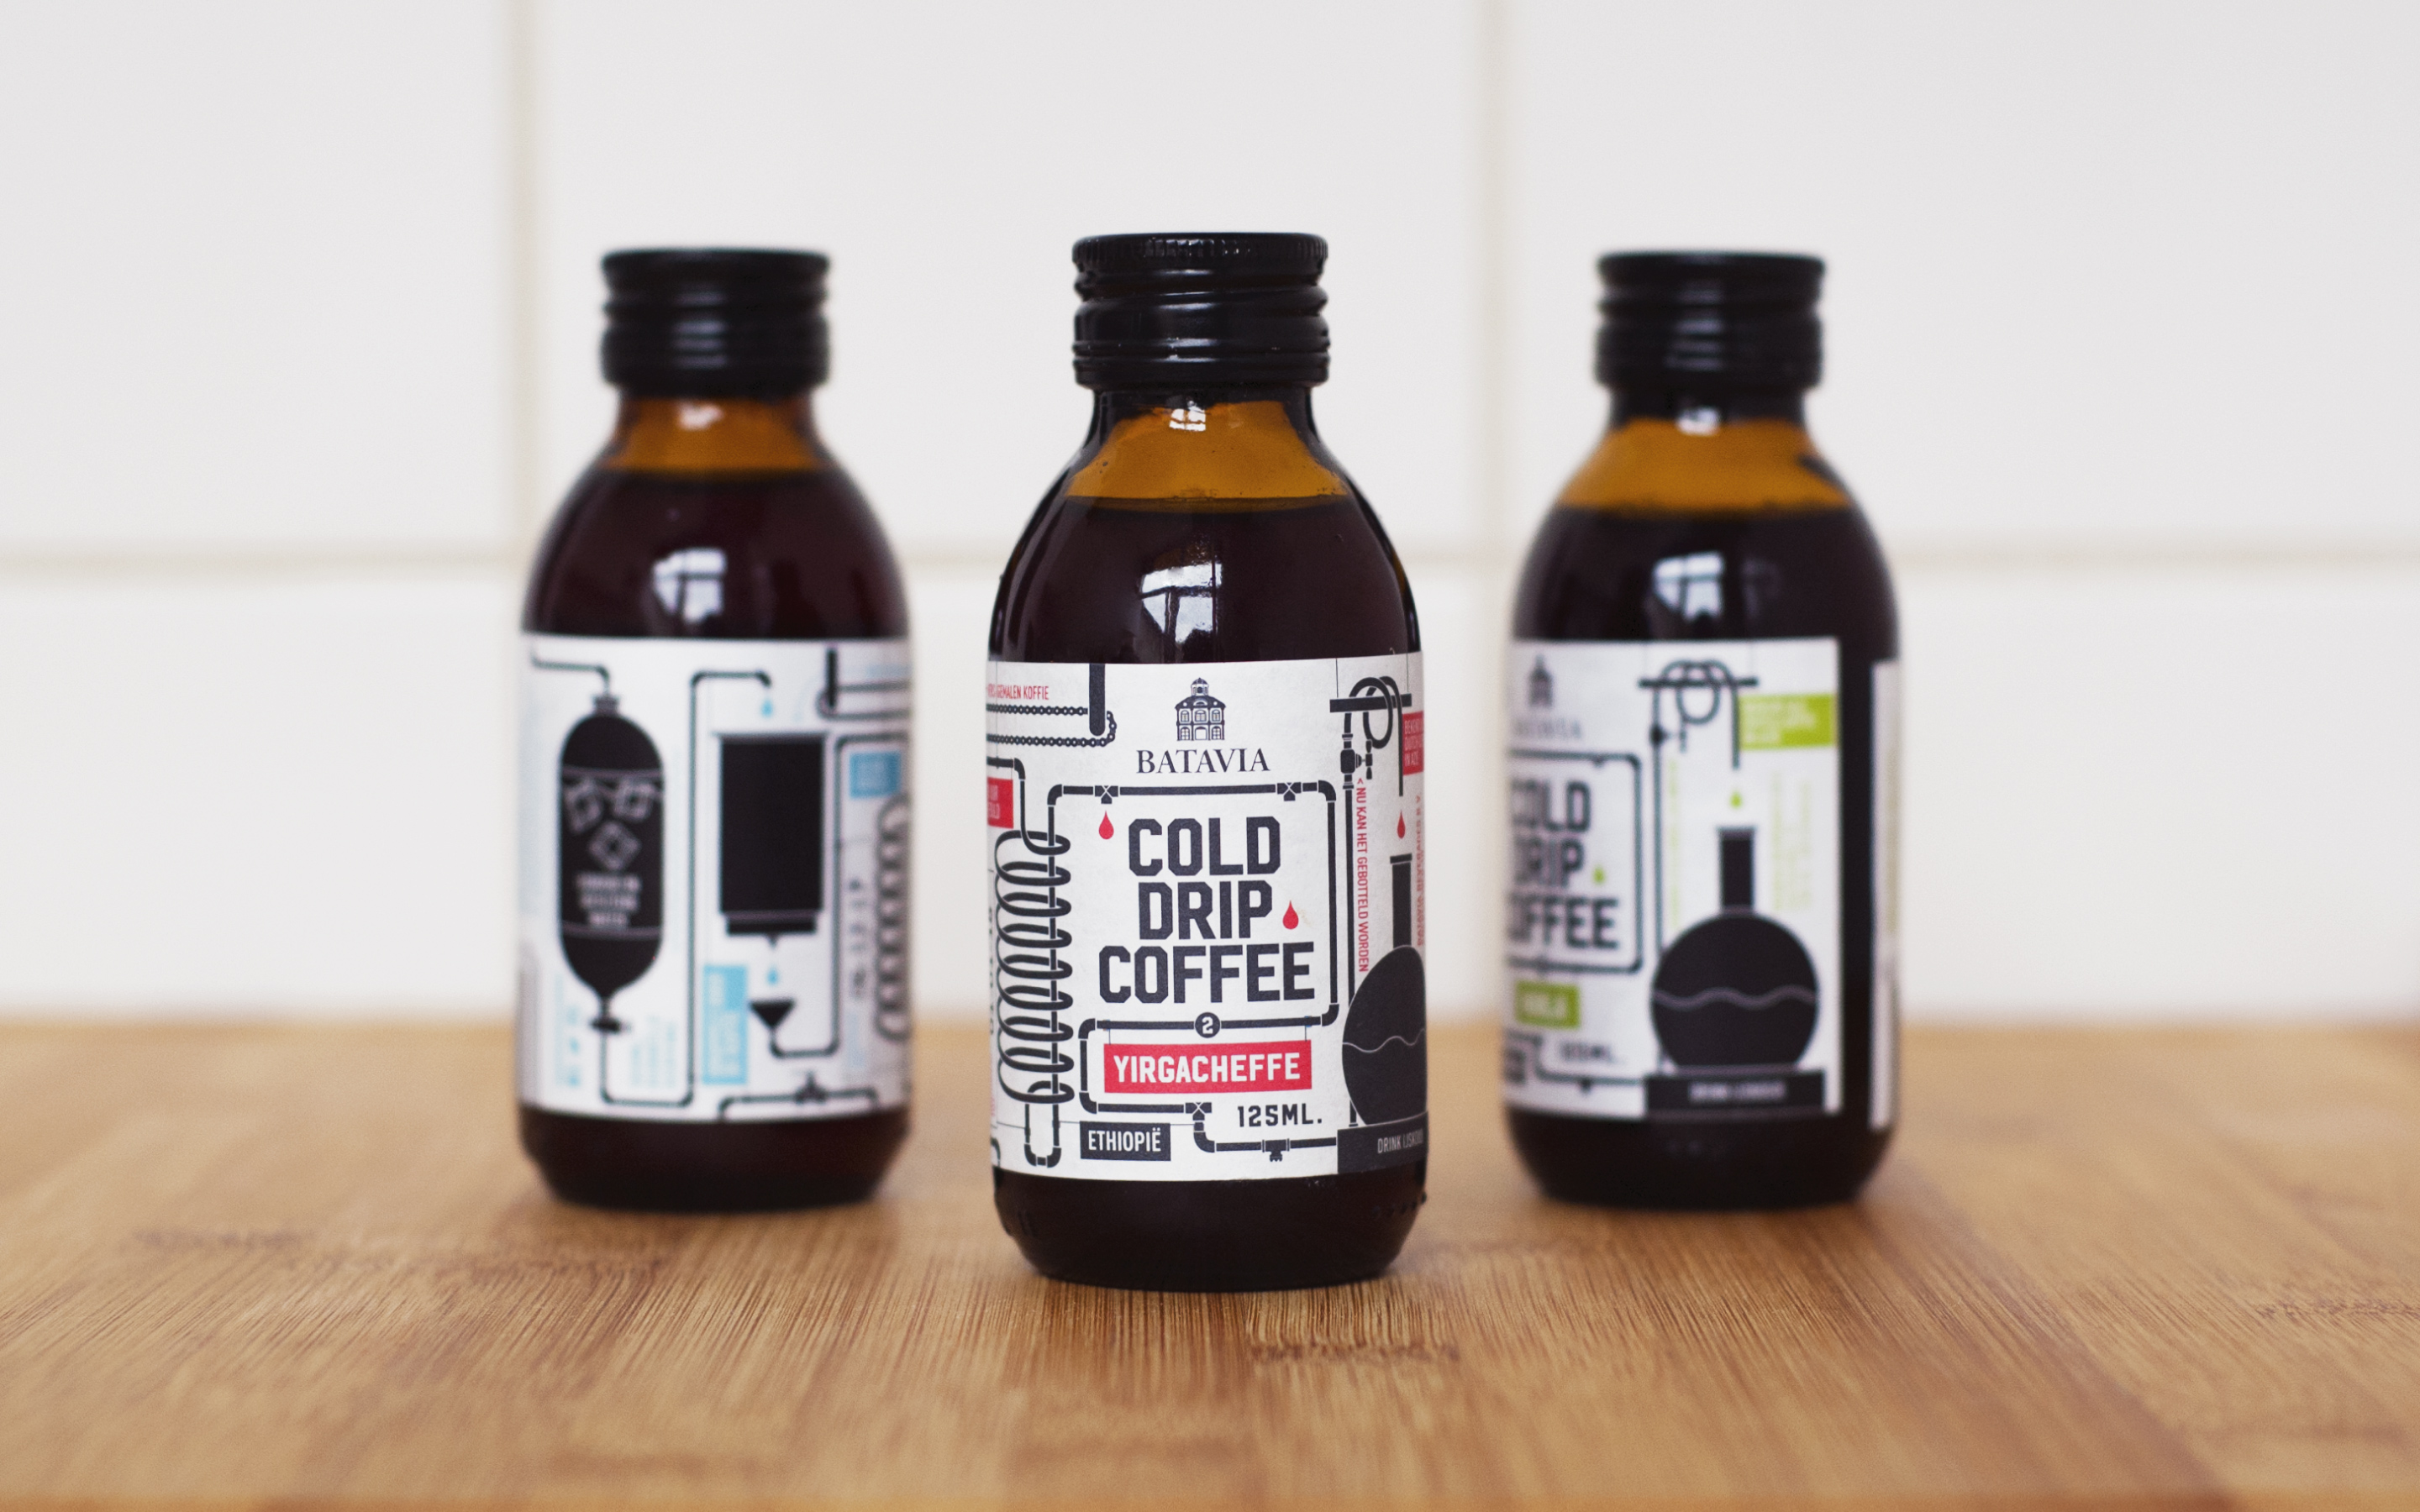 Diego Valle Cold Drip Coffee